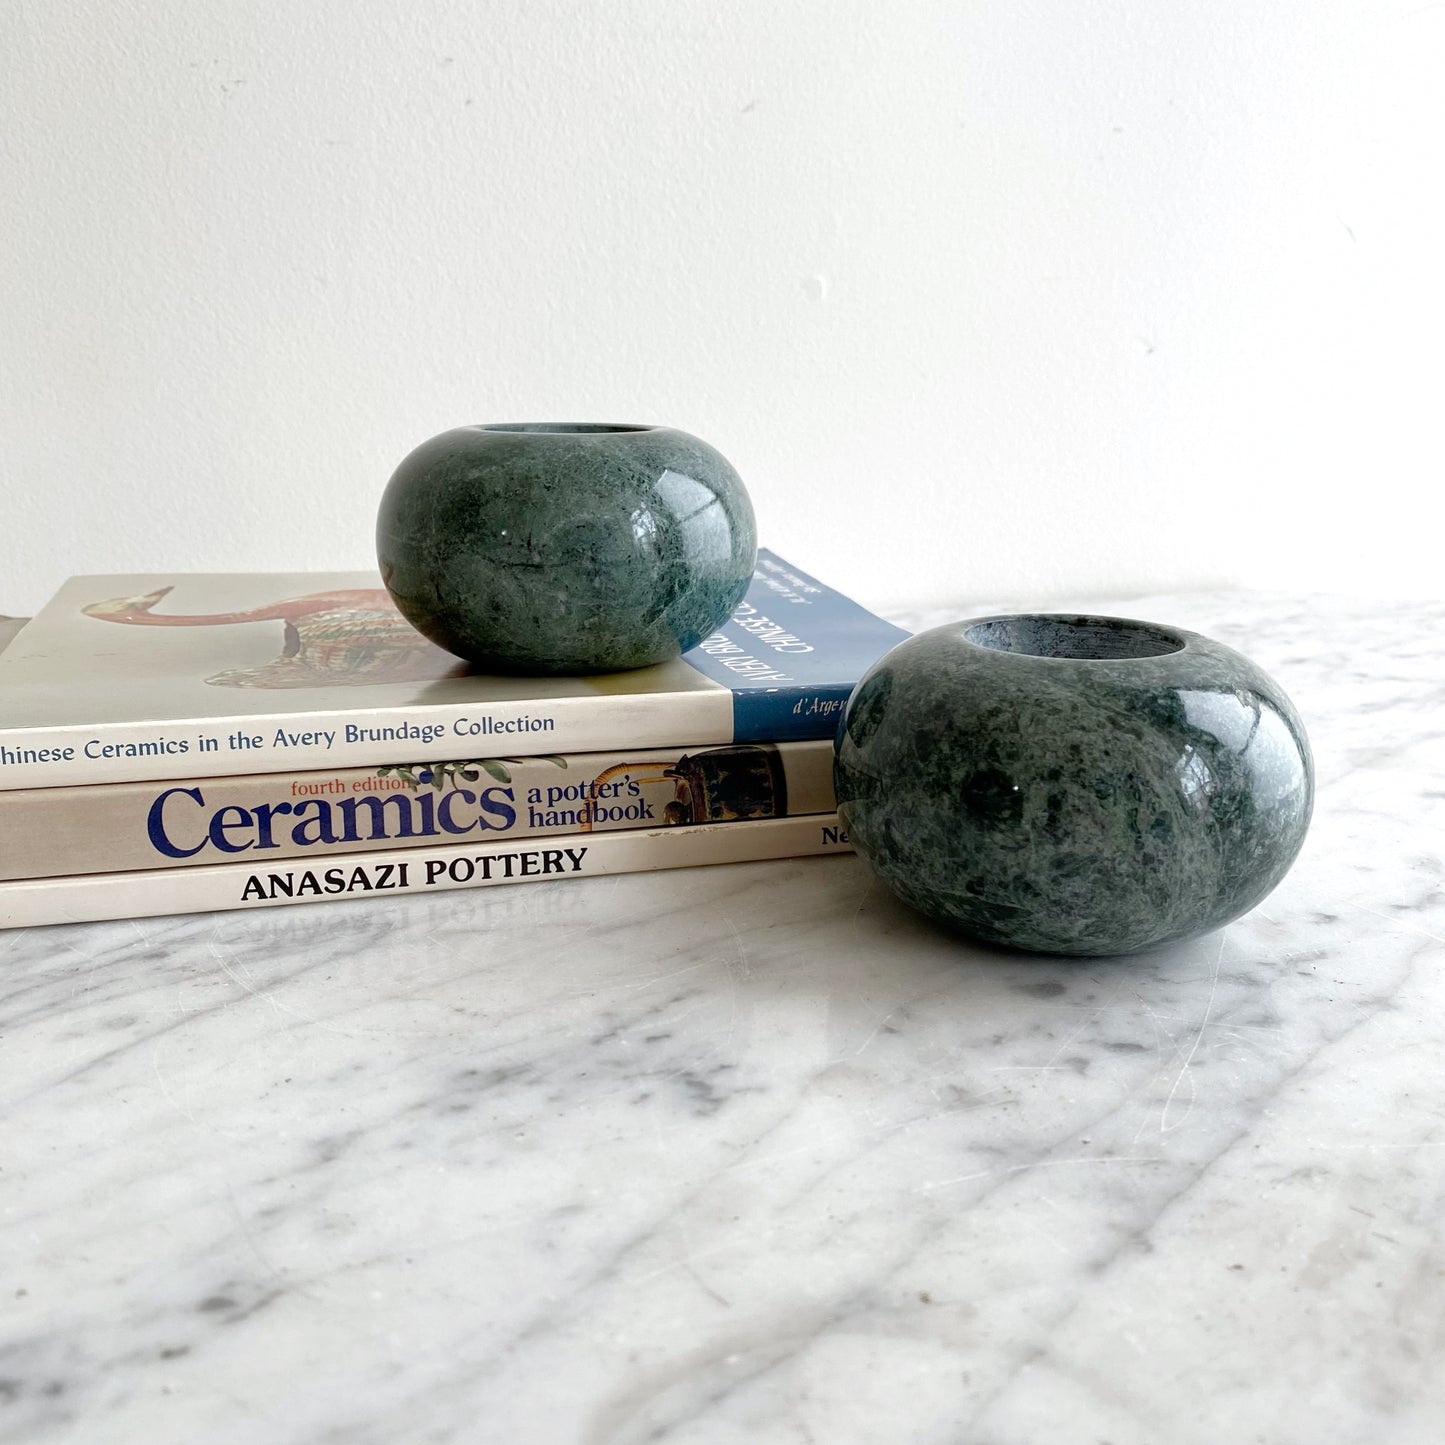 Found Green Marble Tea Light Candle Holder